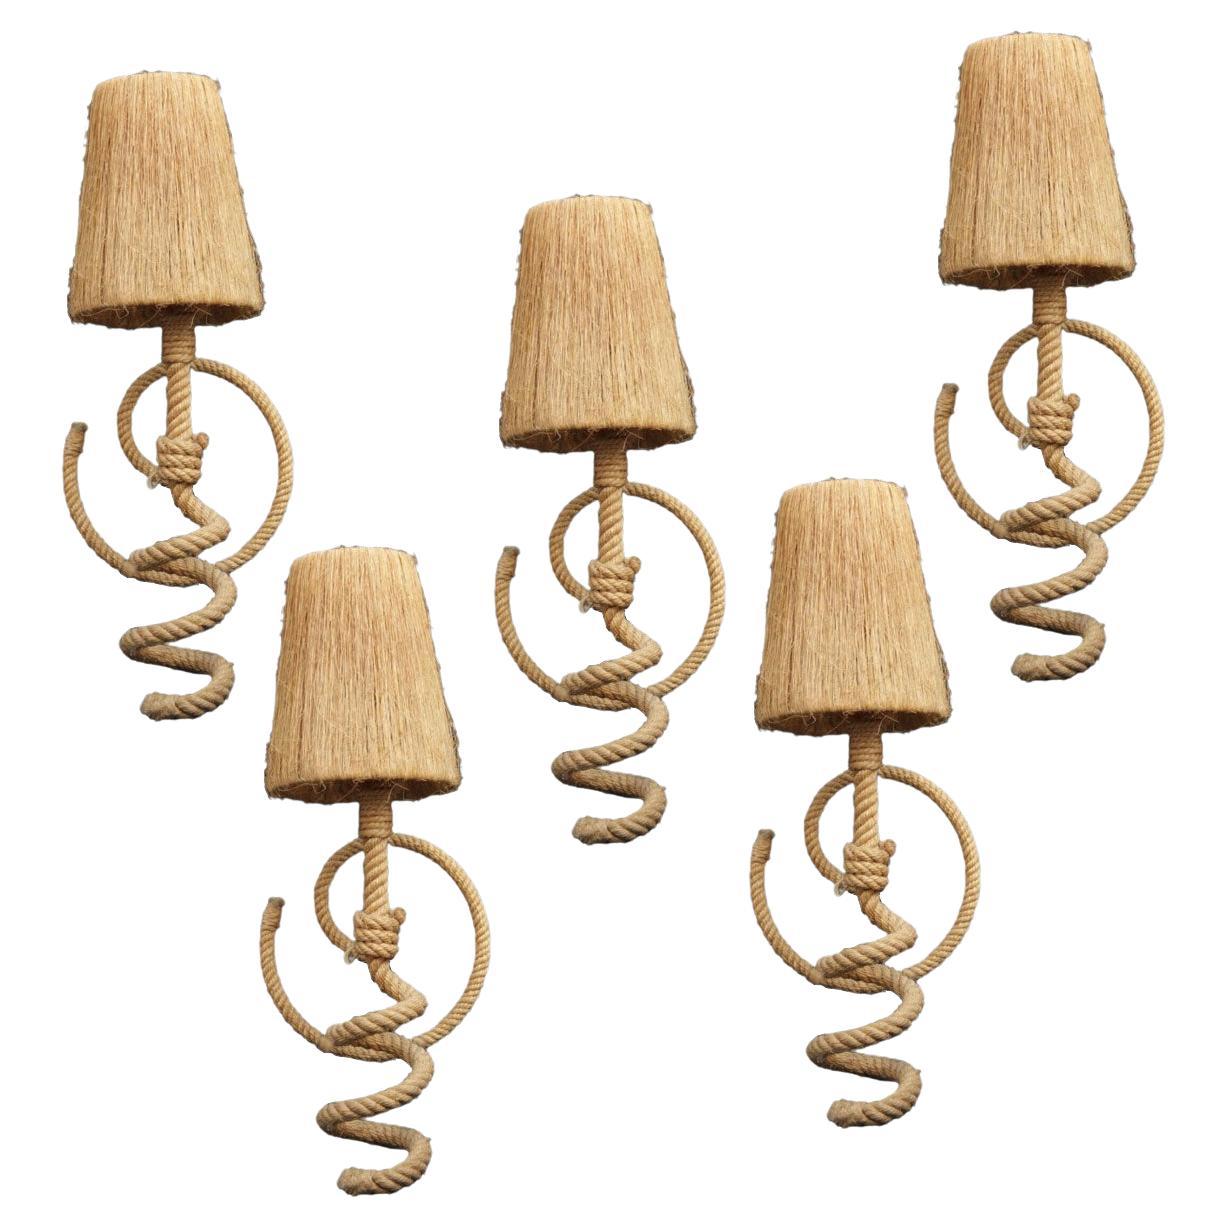 5 Rare Large Rope Design Sconces by Adrien Audoux and Frida Minet